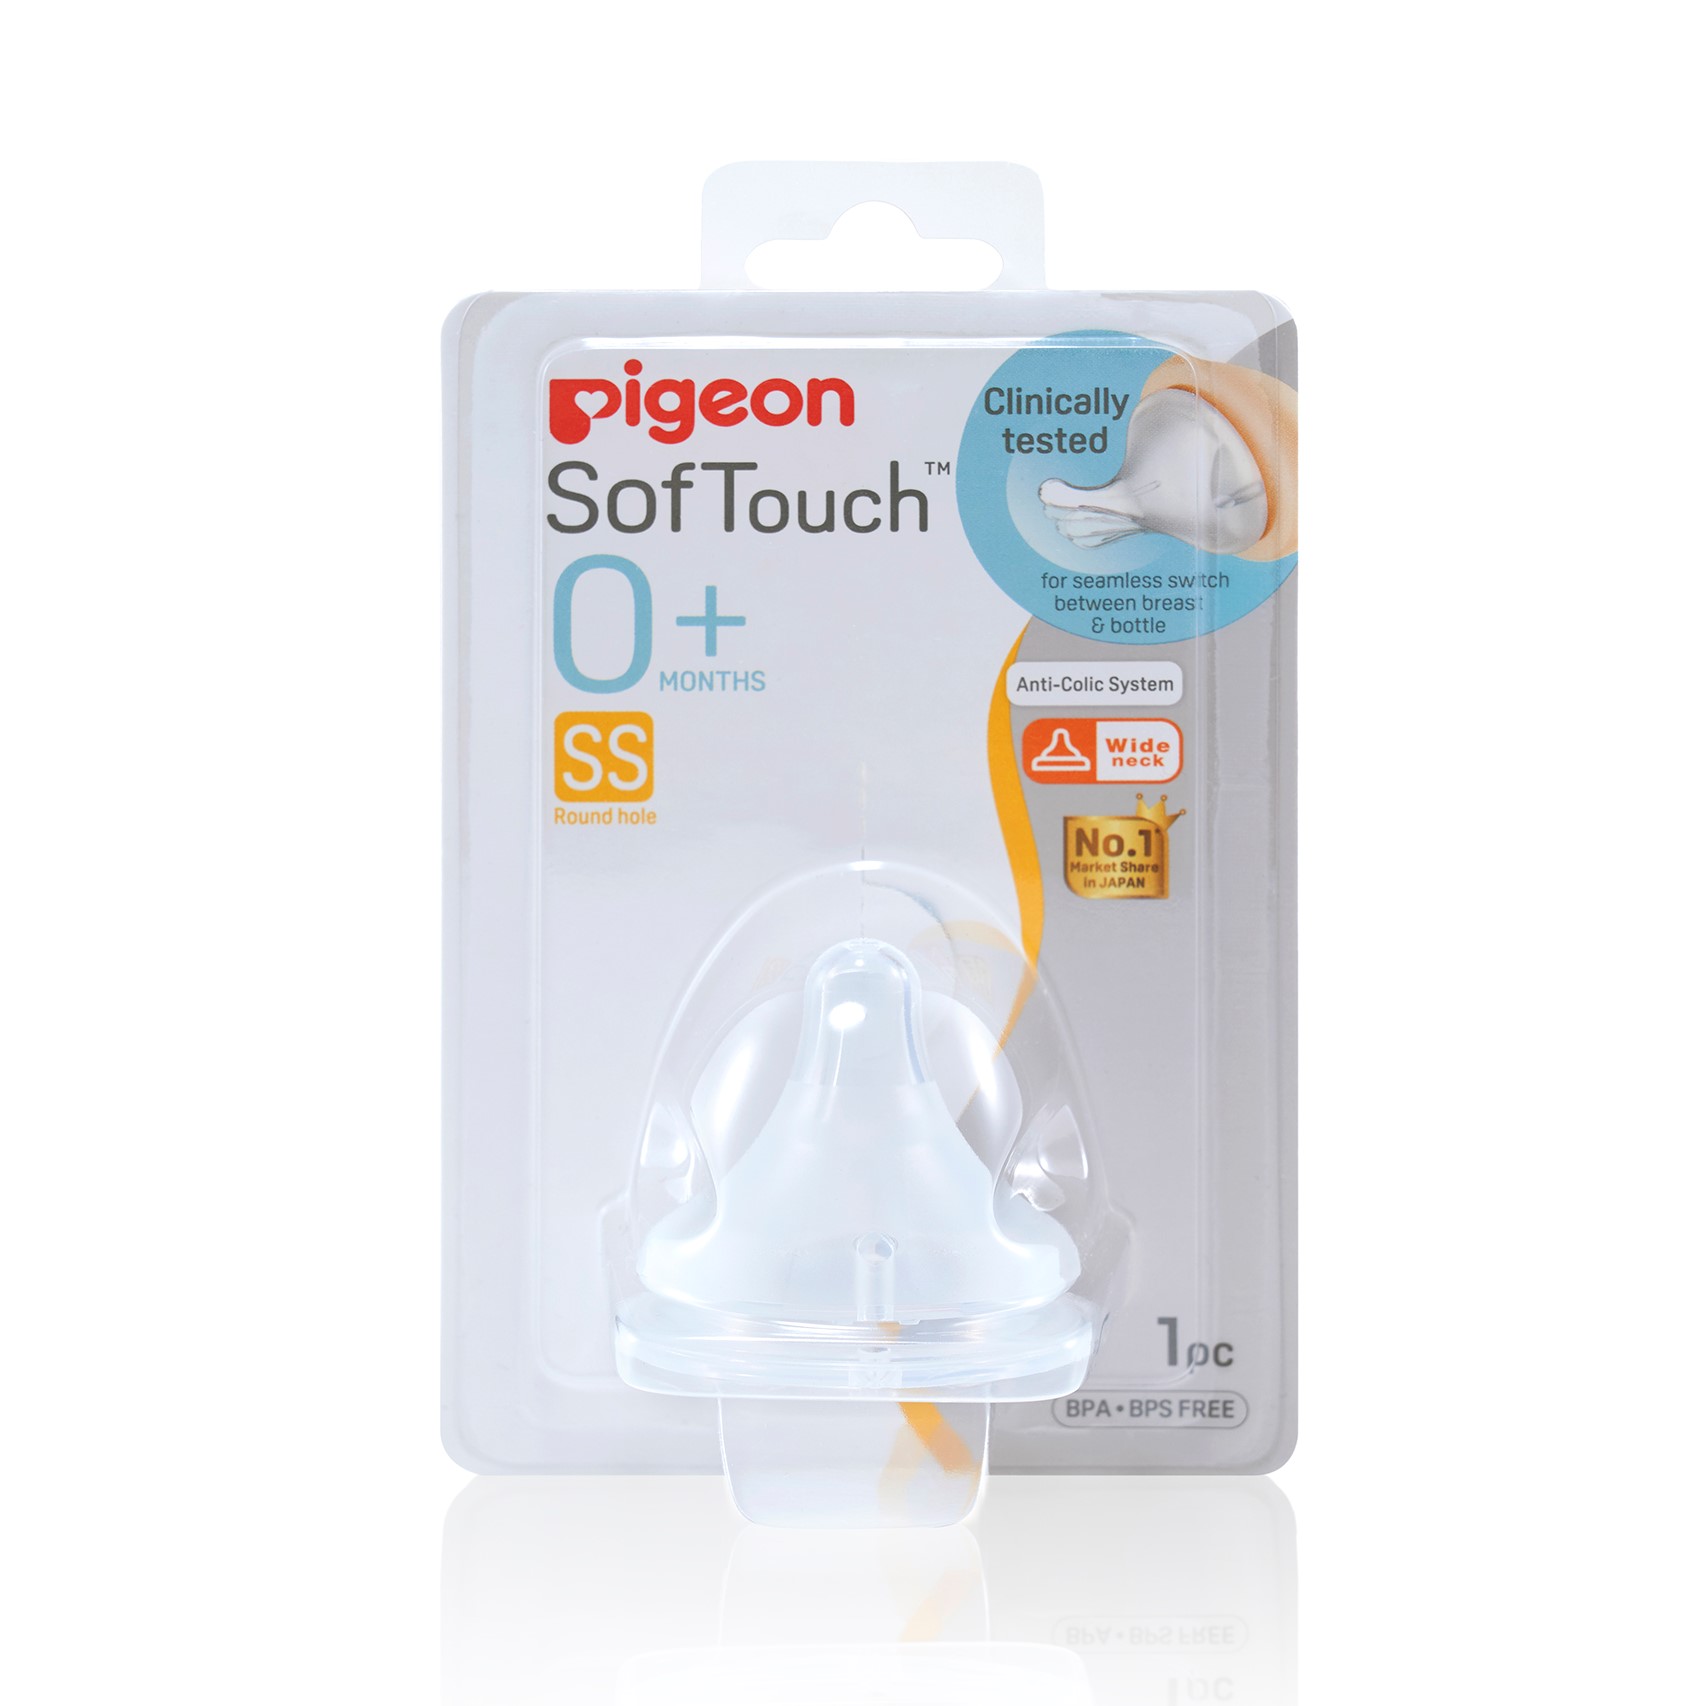 baby-fair Pigeon SofTouch Nipple Blister Pack 1Pc (SS) (PG-78478)